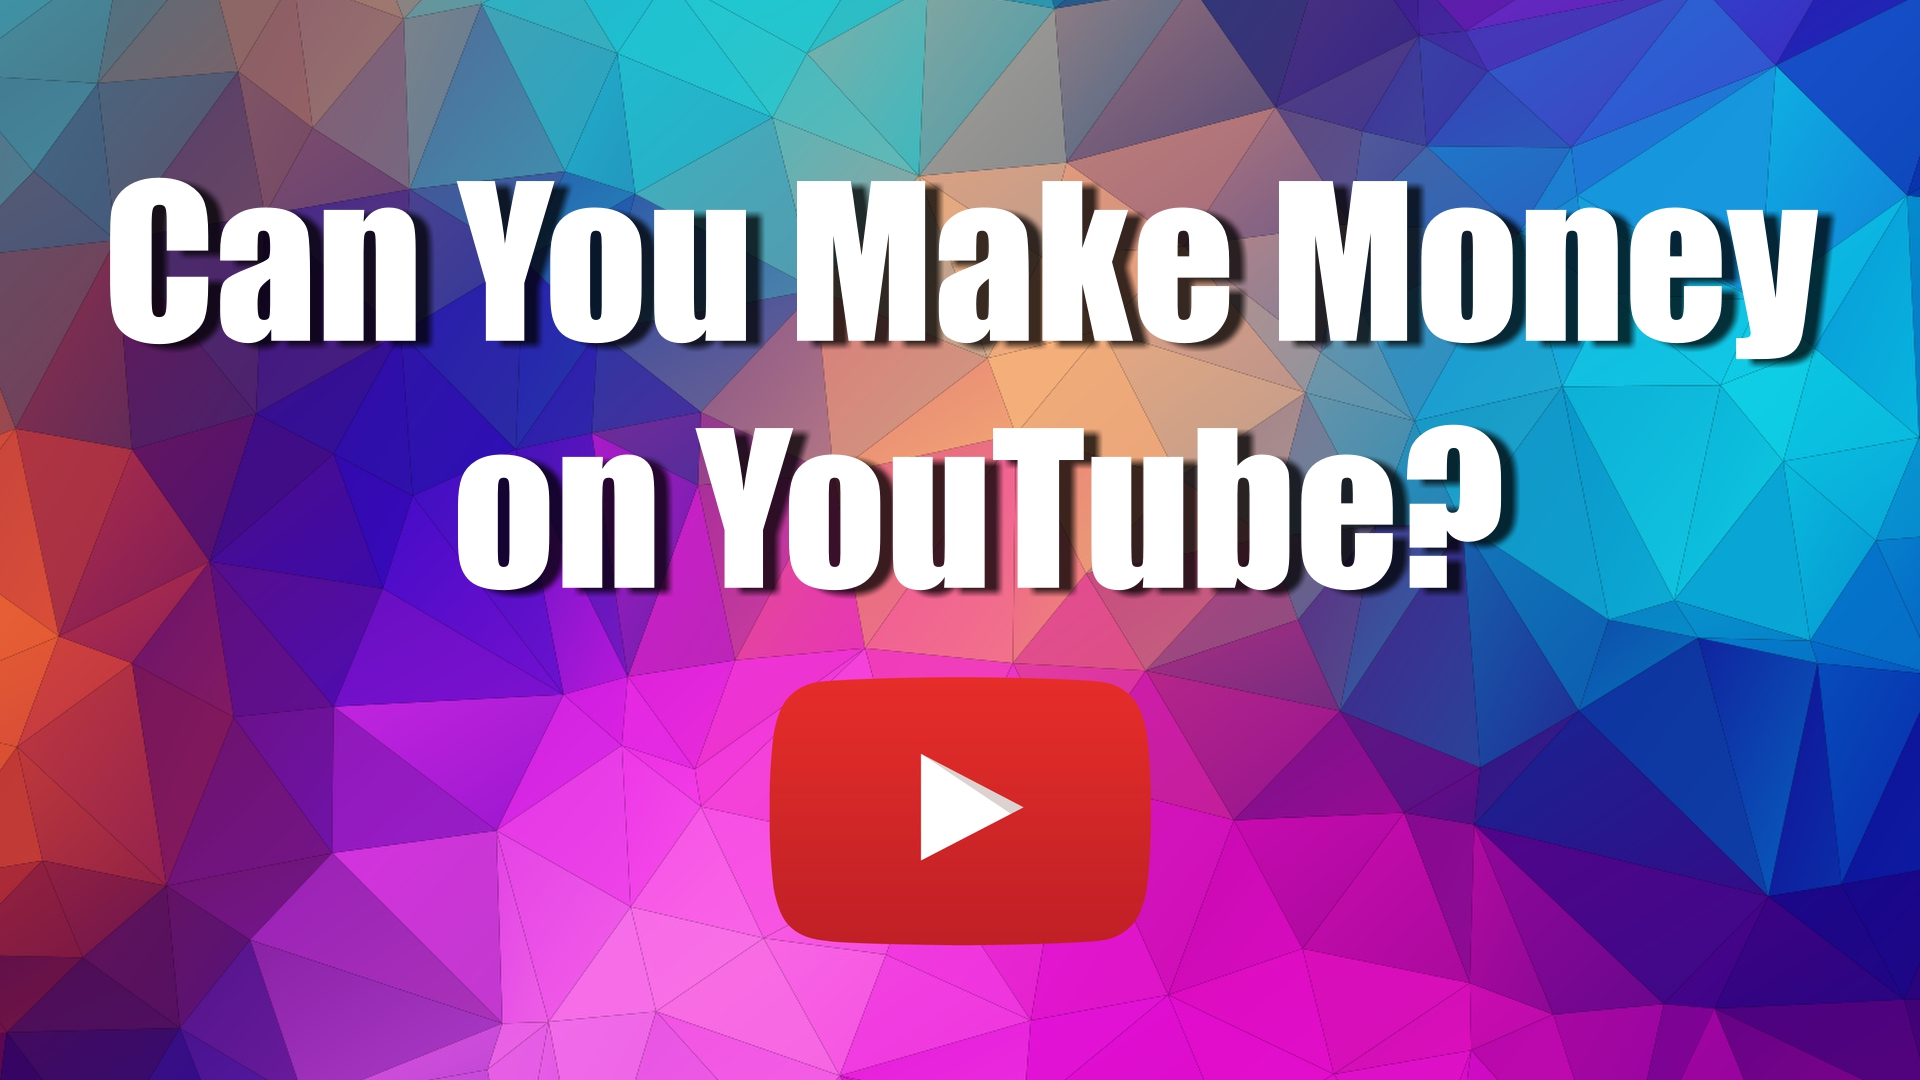 Can you make money on youtube